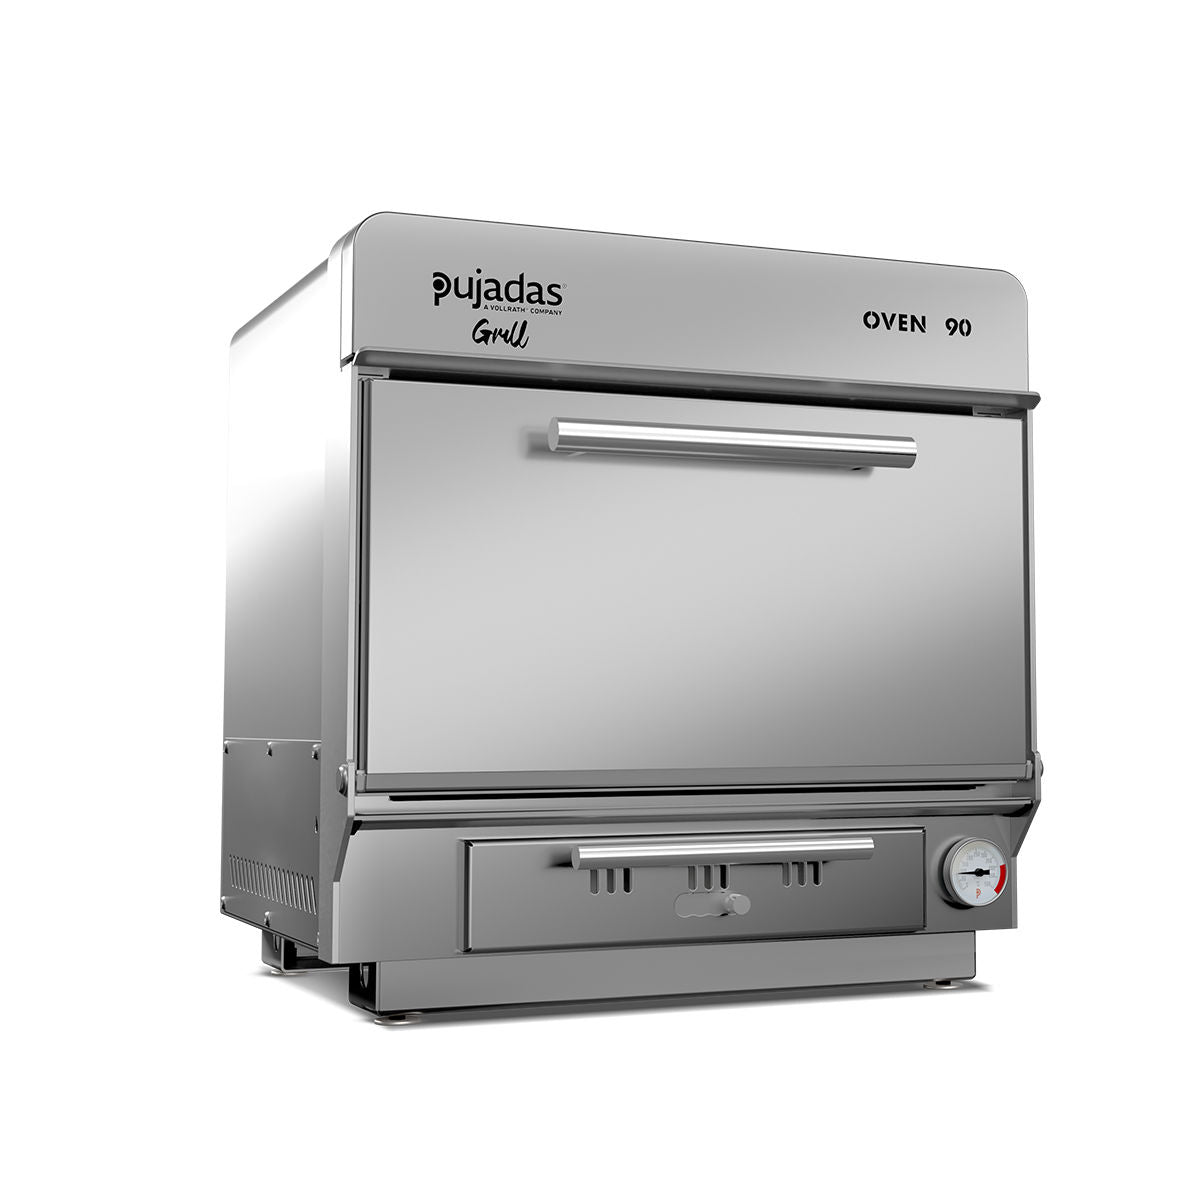 Pujadas Charcoal Countertop Oven 85090 left view